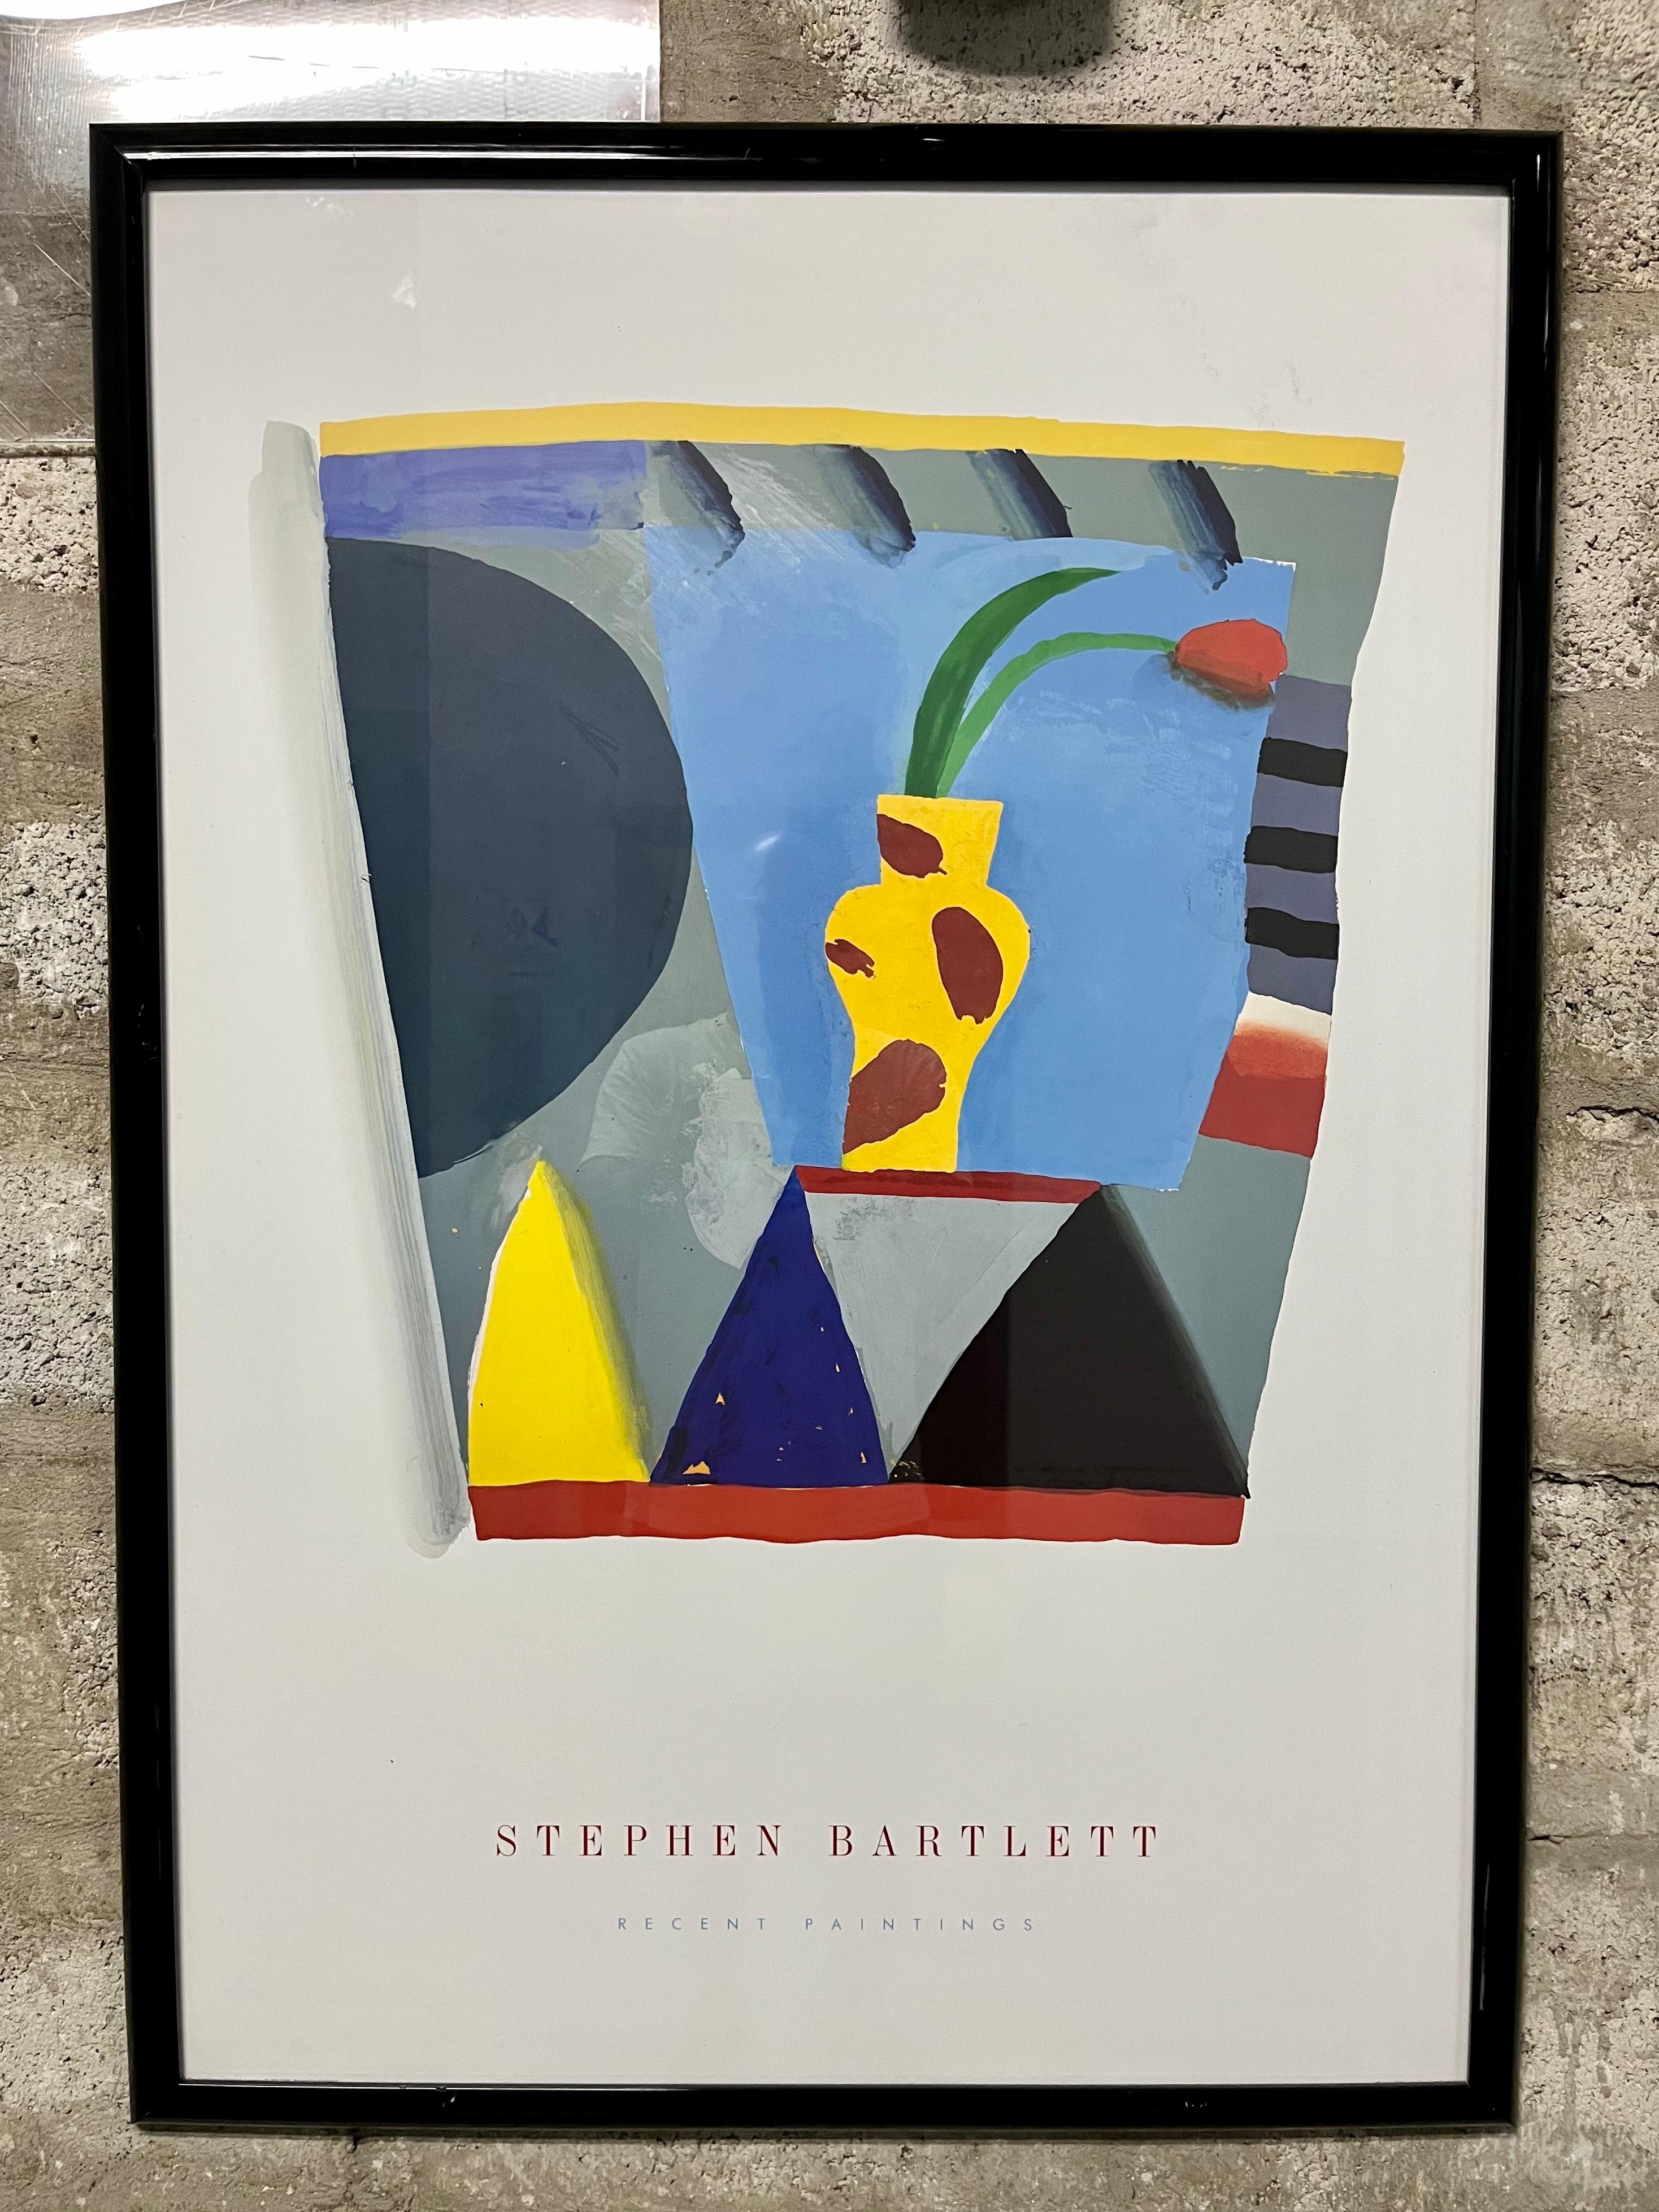 Vintage Stephen Bartlett, Recent Paintings, Framed Exhibition Poster. Circa 1980s.
Features a bright colors, modern geometric abstract still life over a neutral gray background, professionally framed with a glossy black frame. 
In excellent, near